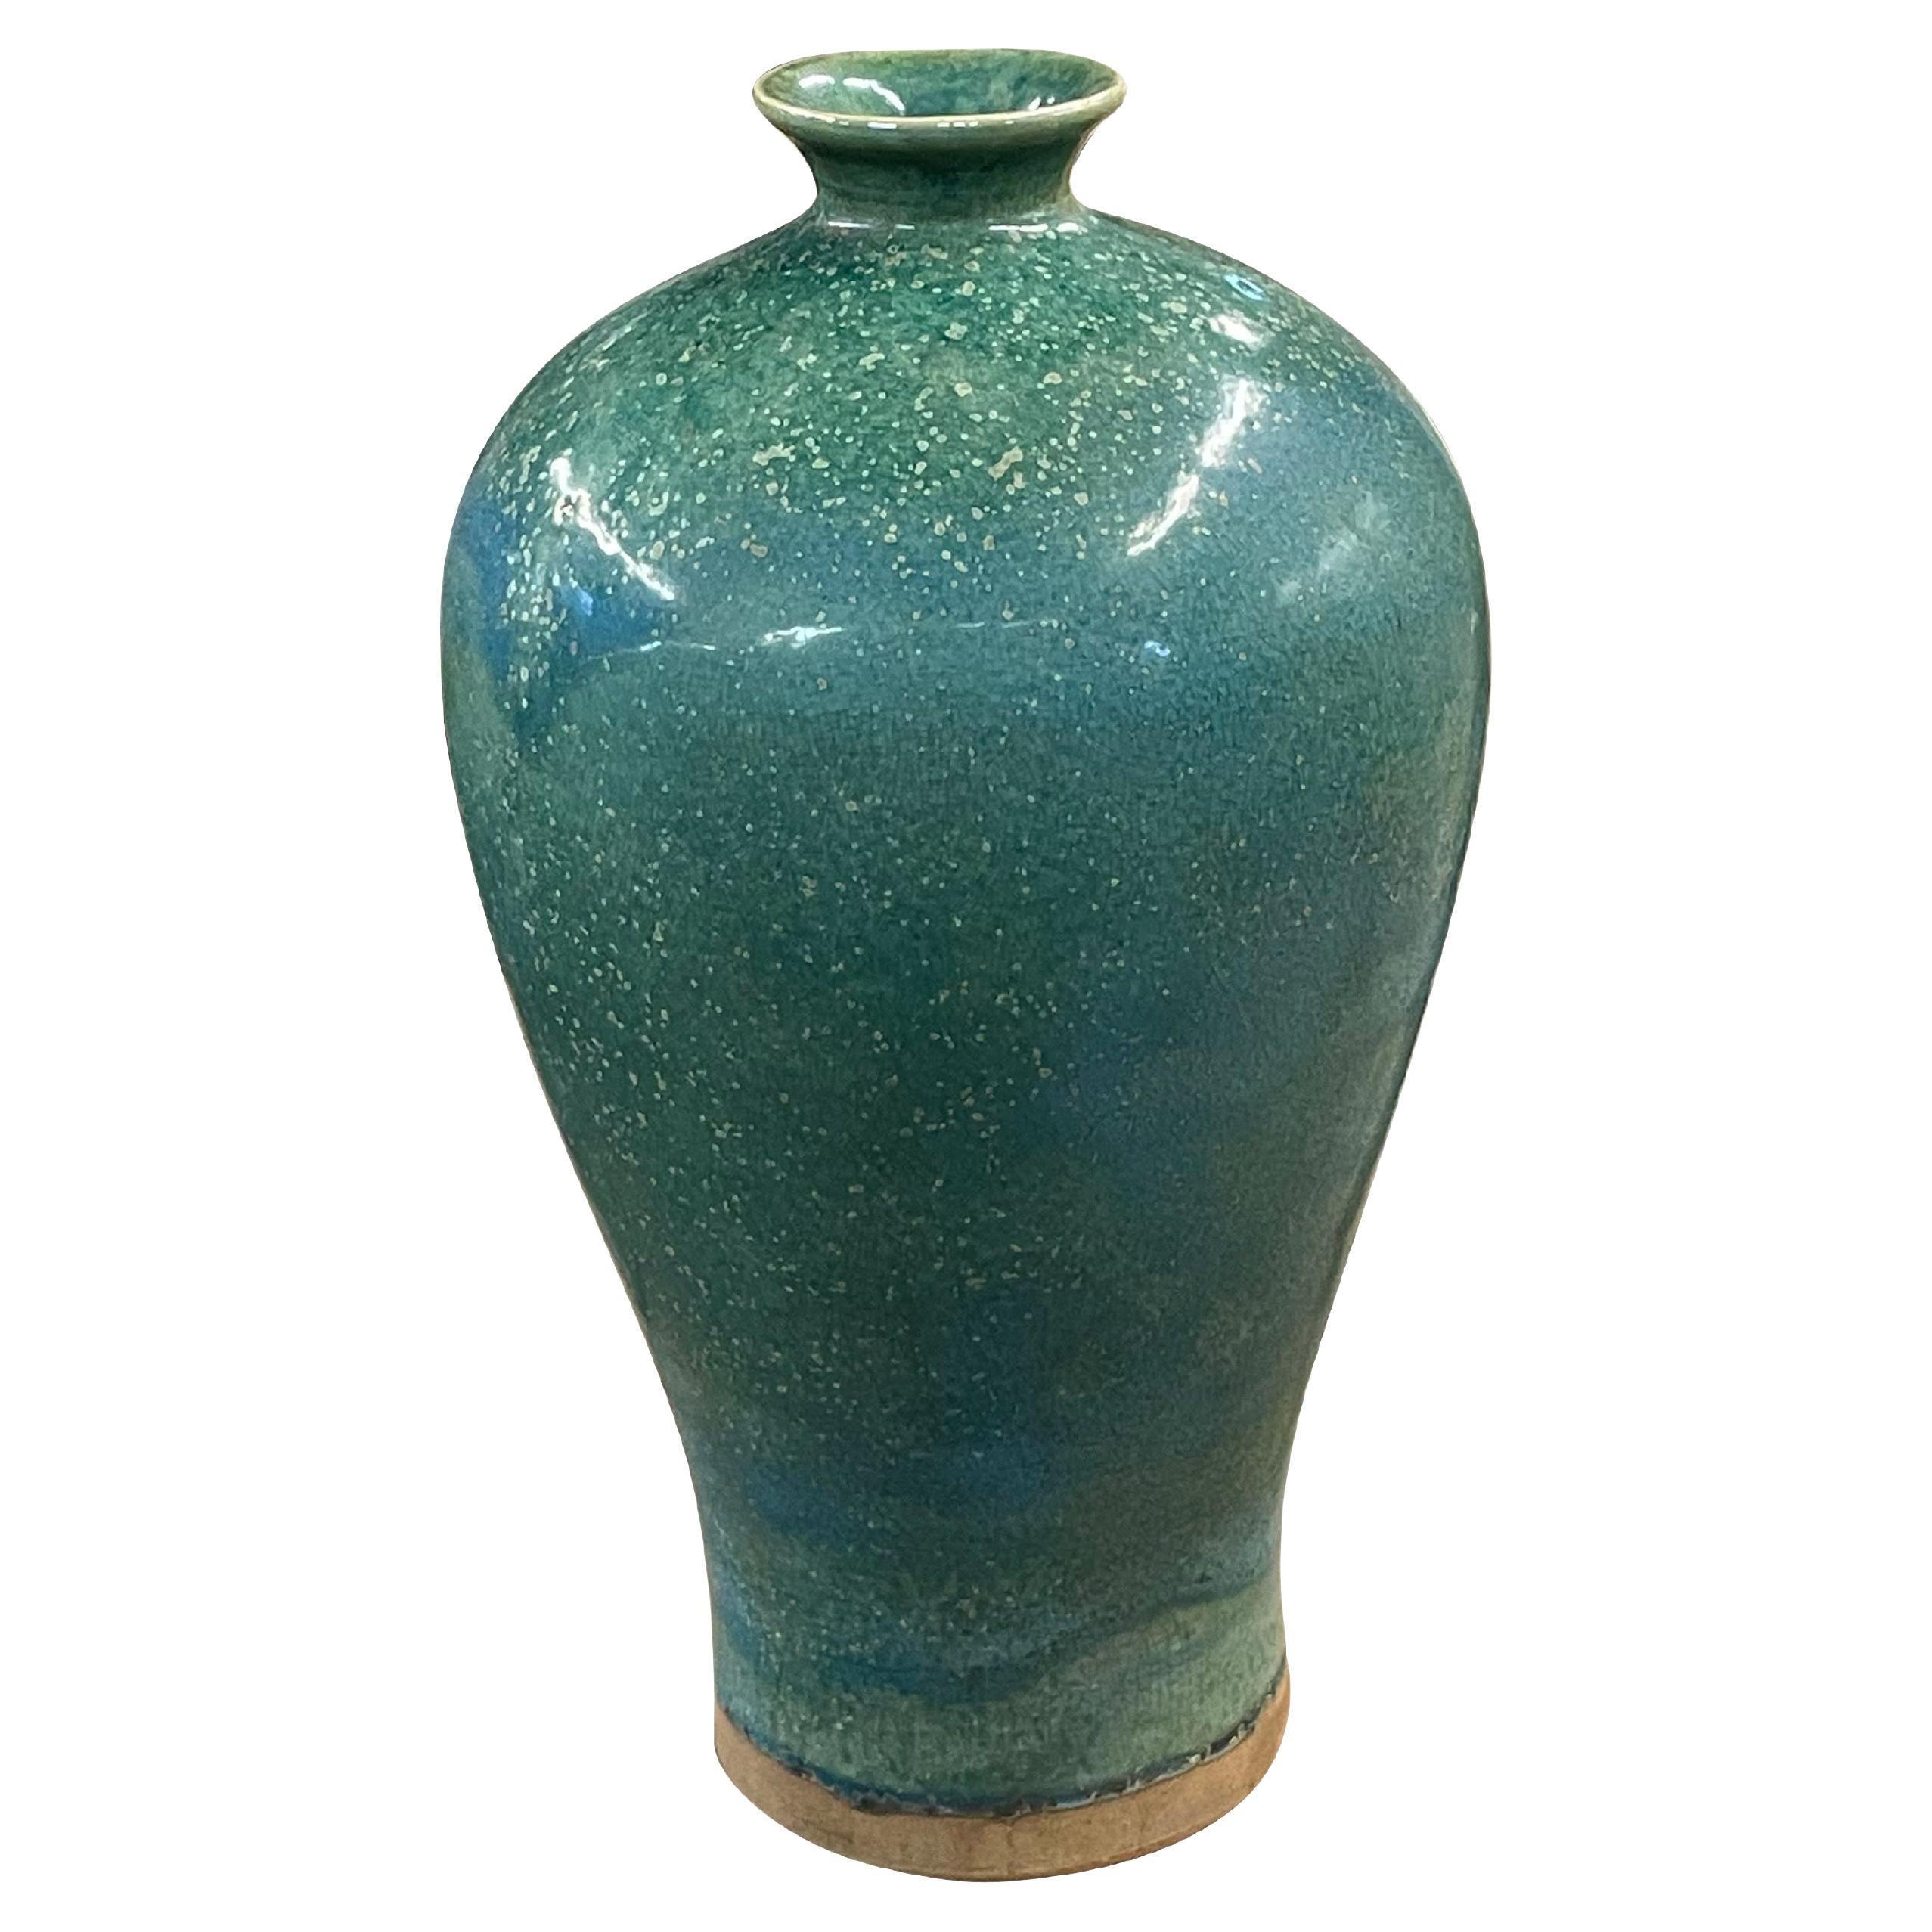 Contemporary Chinese turquoise ceramic vase with decorative speckled glaze.
Can hold water.
Part of large collection.